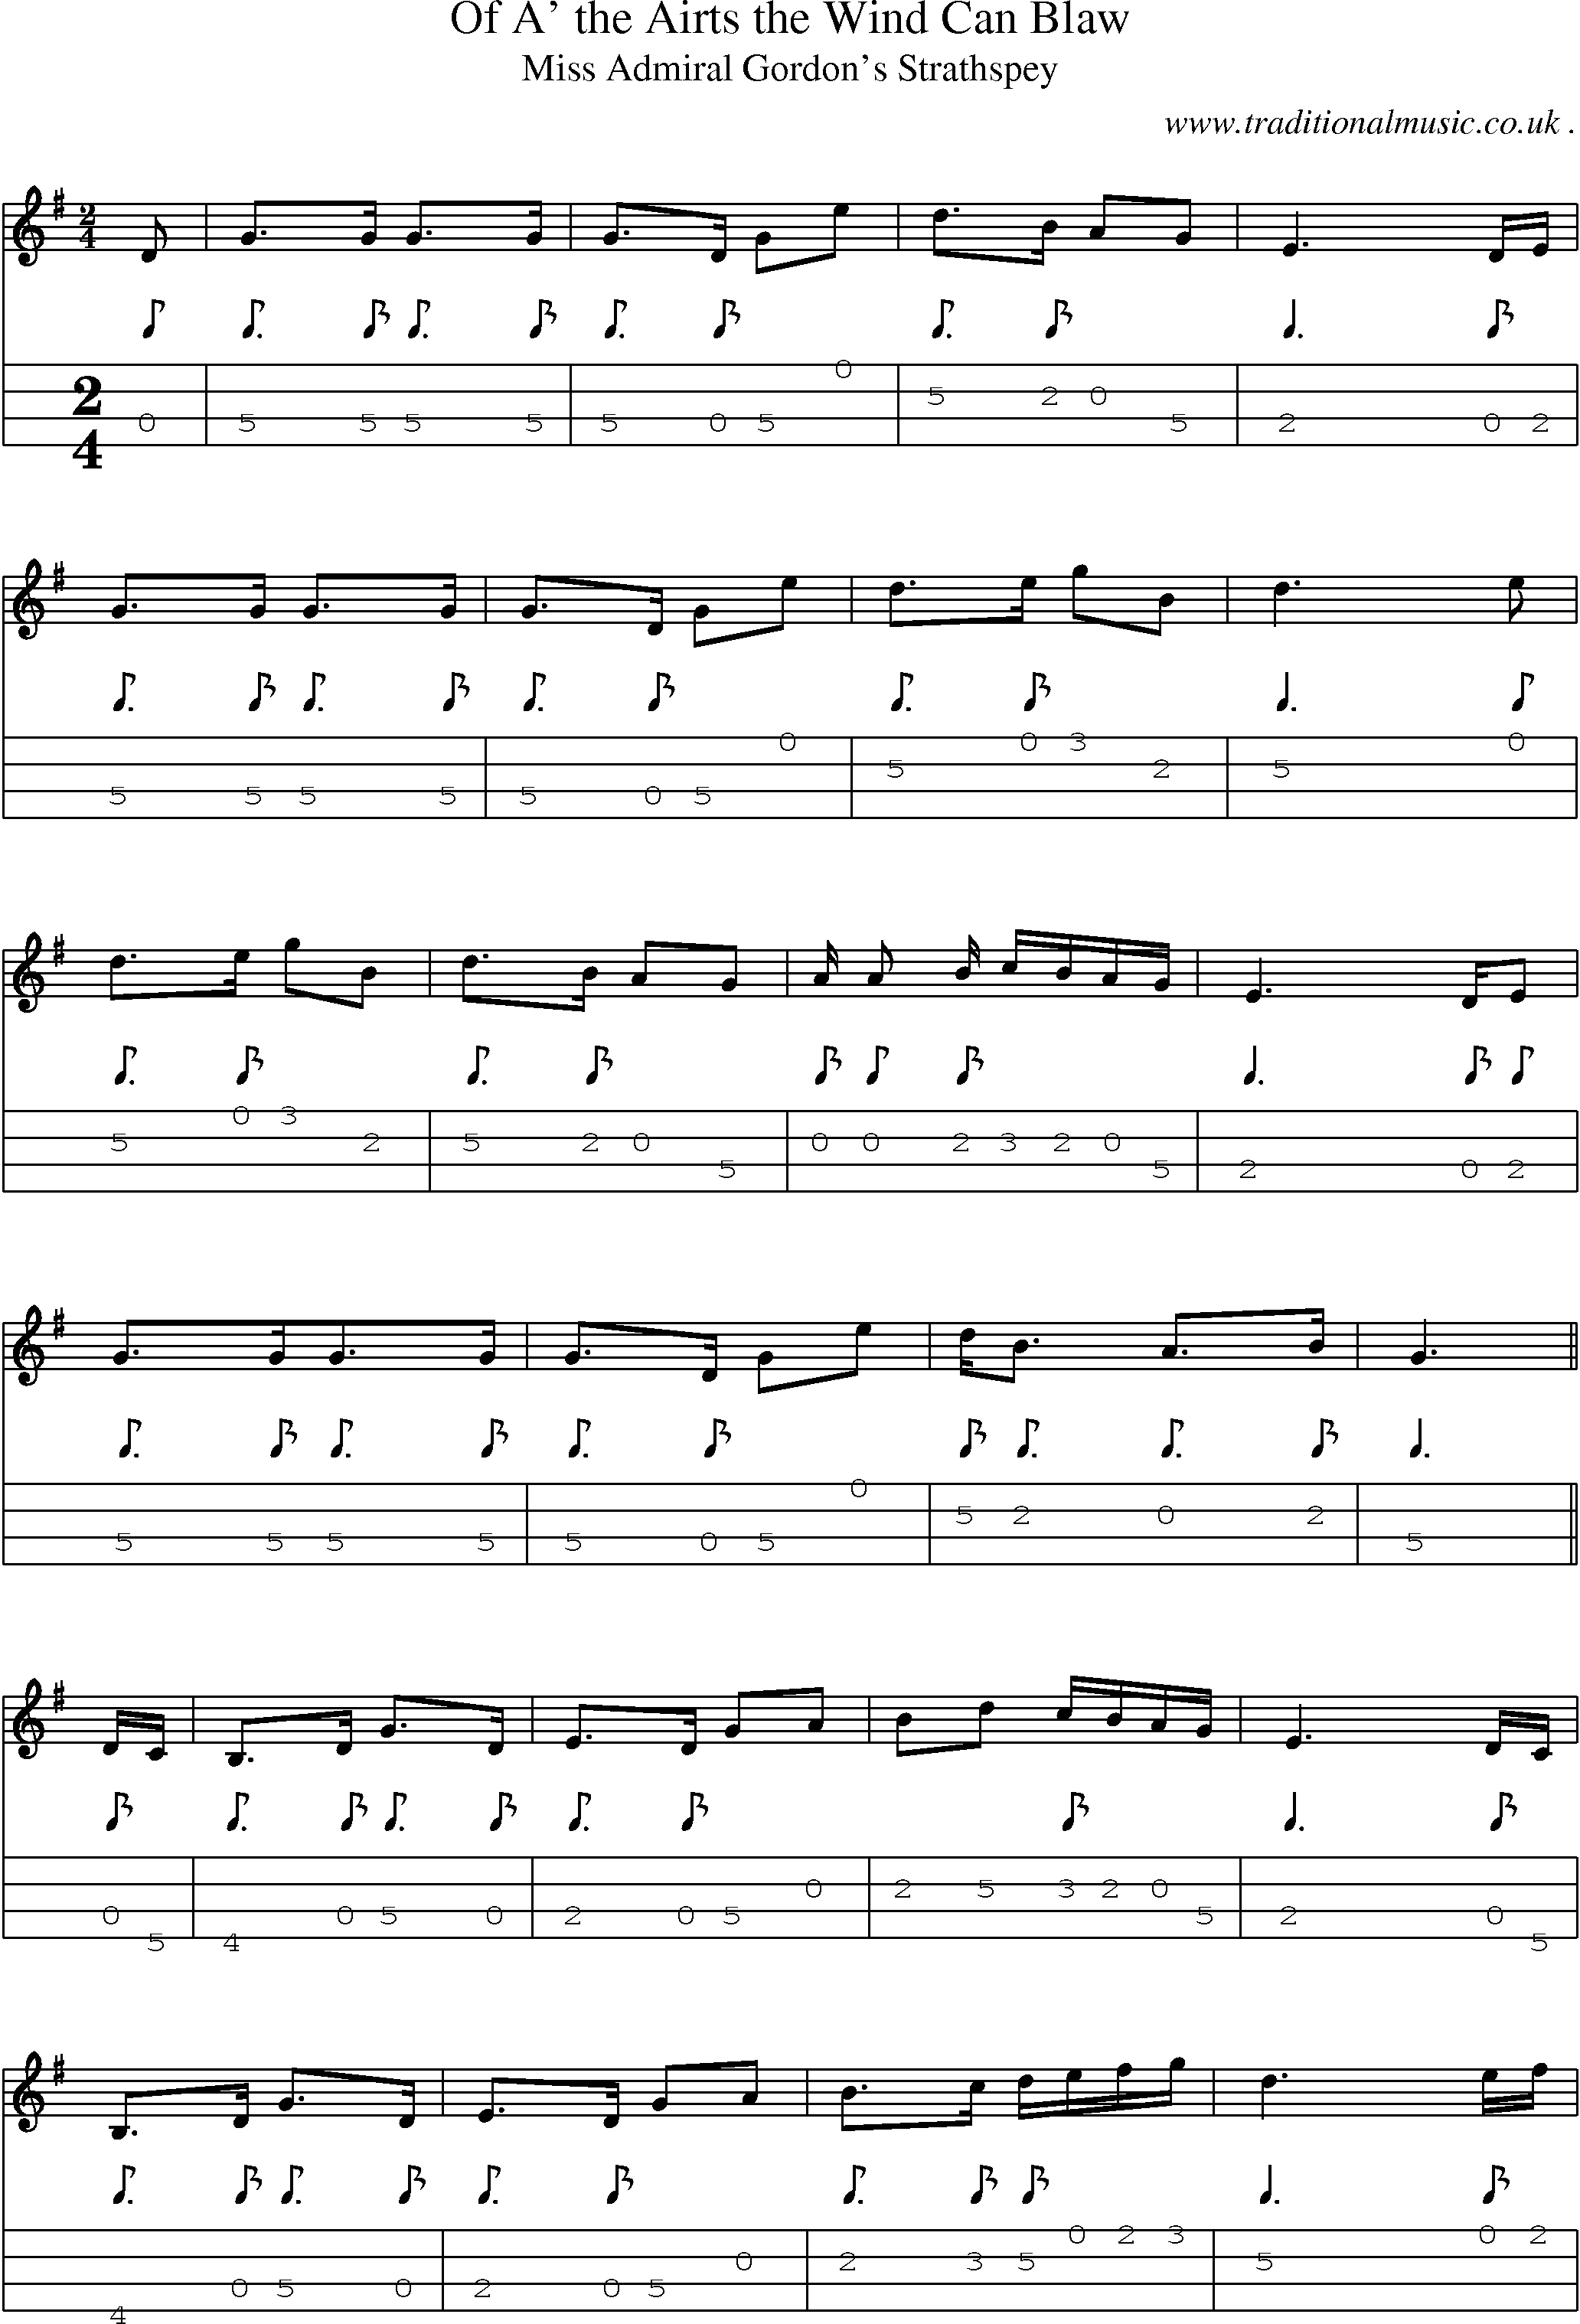 Sheet-Music and Mandolin Tabs for Of A The Airts The Wind Can Blaw